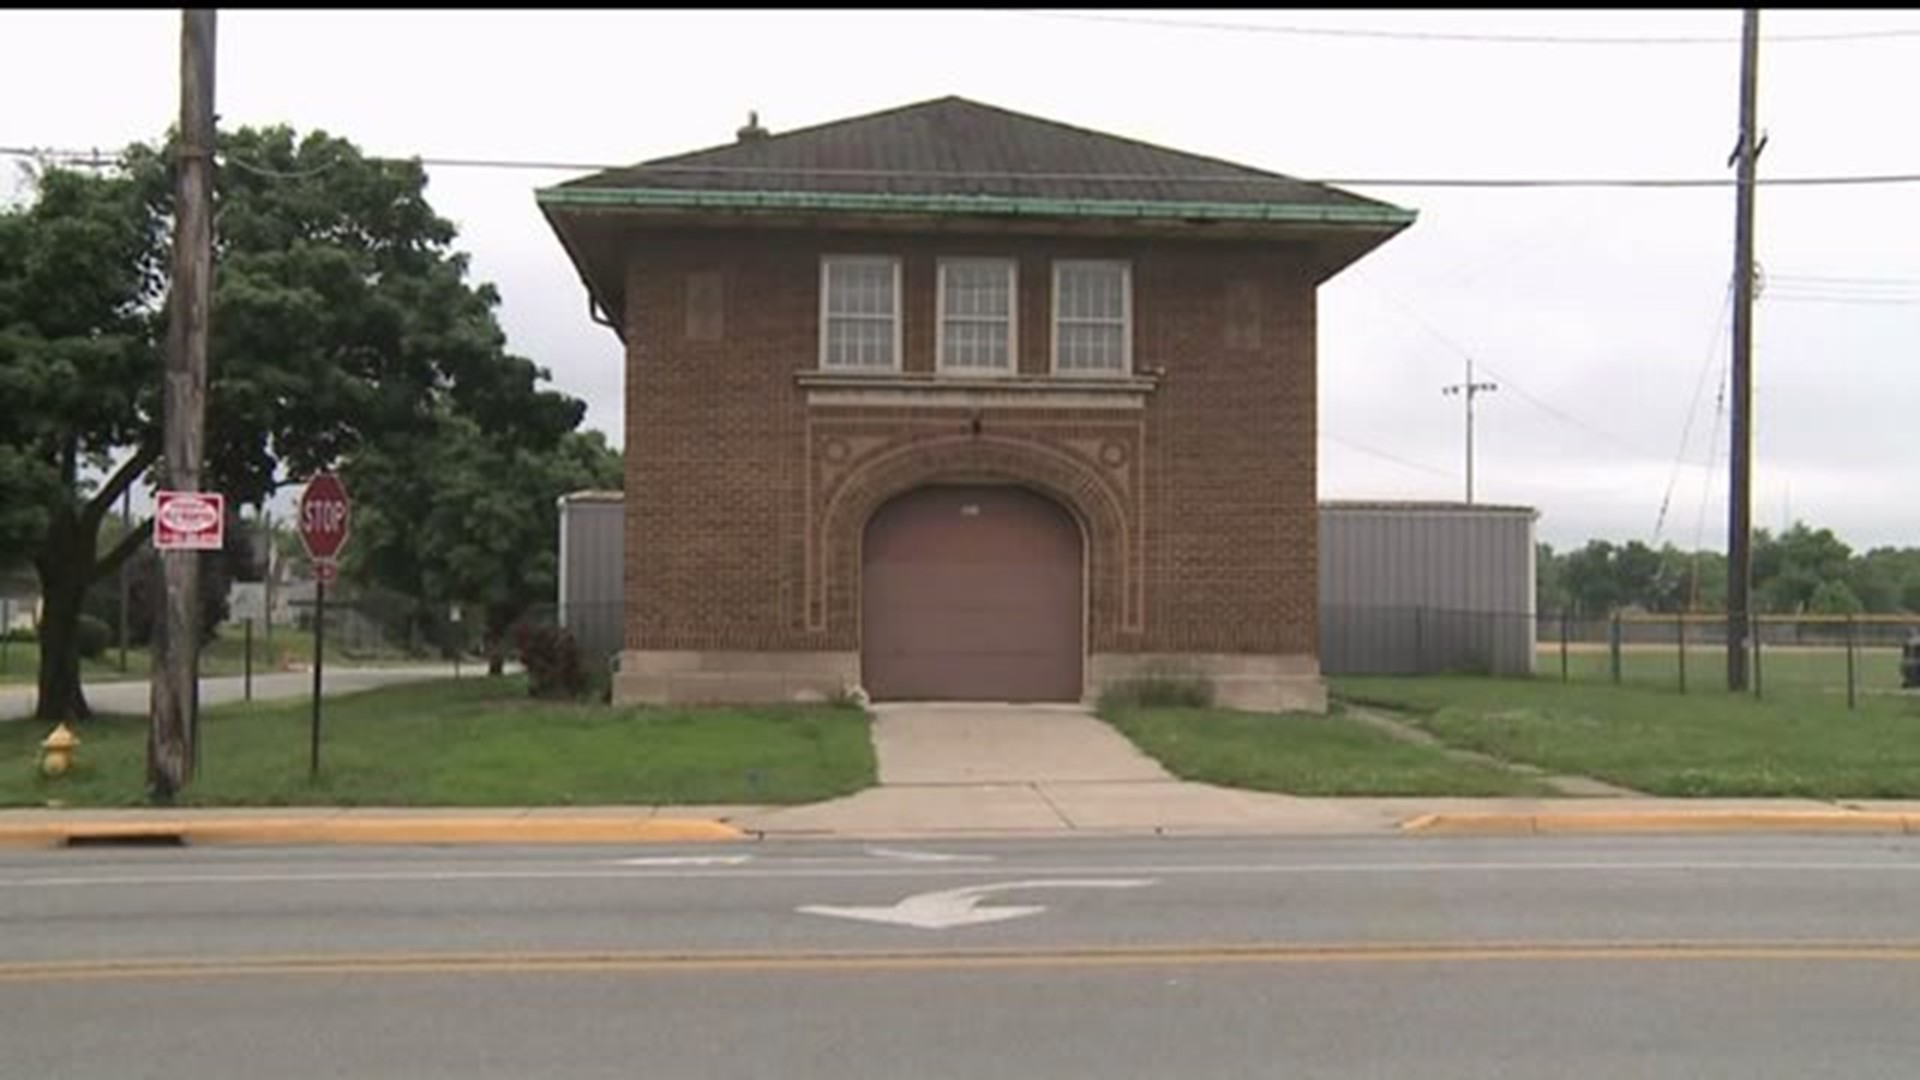 Community members meet to discuss future of Douglas Park`s old fire house